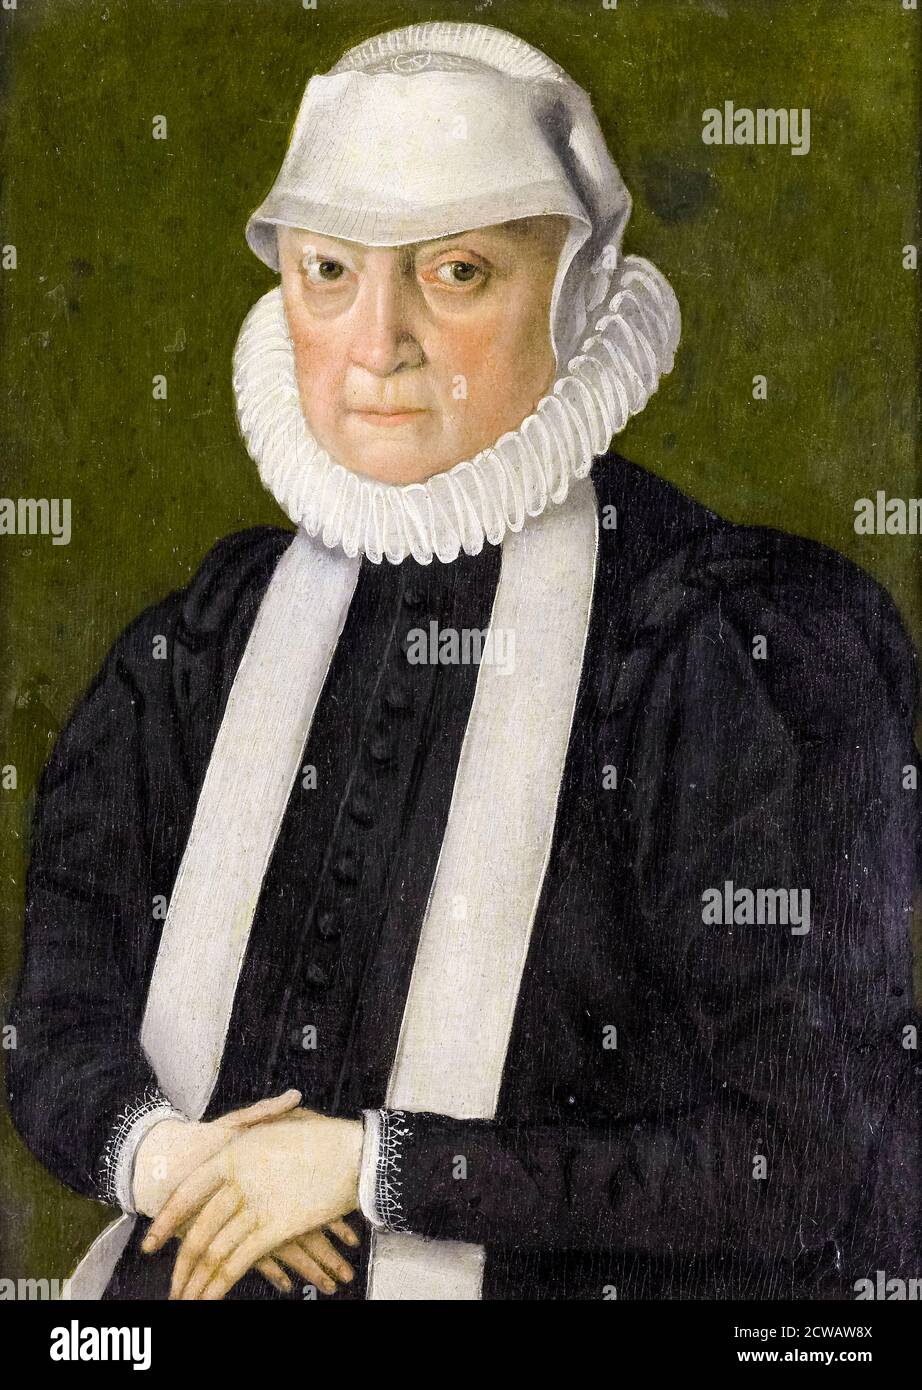 Portrait of a Woman thought to be Anna Jagiellon (1523-1596) Queen of Poland, painting by unknown artist, 1570-1580 Stock Photo